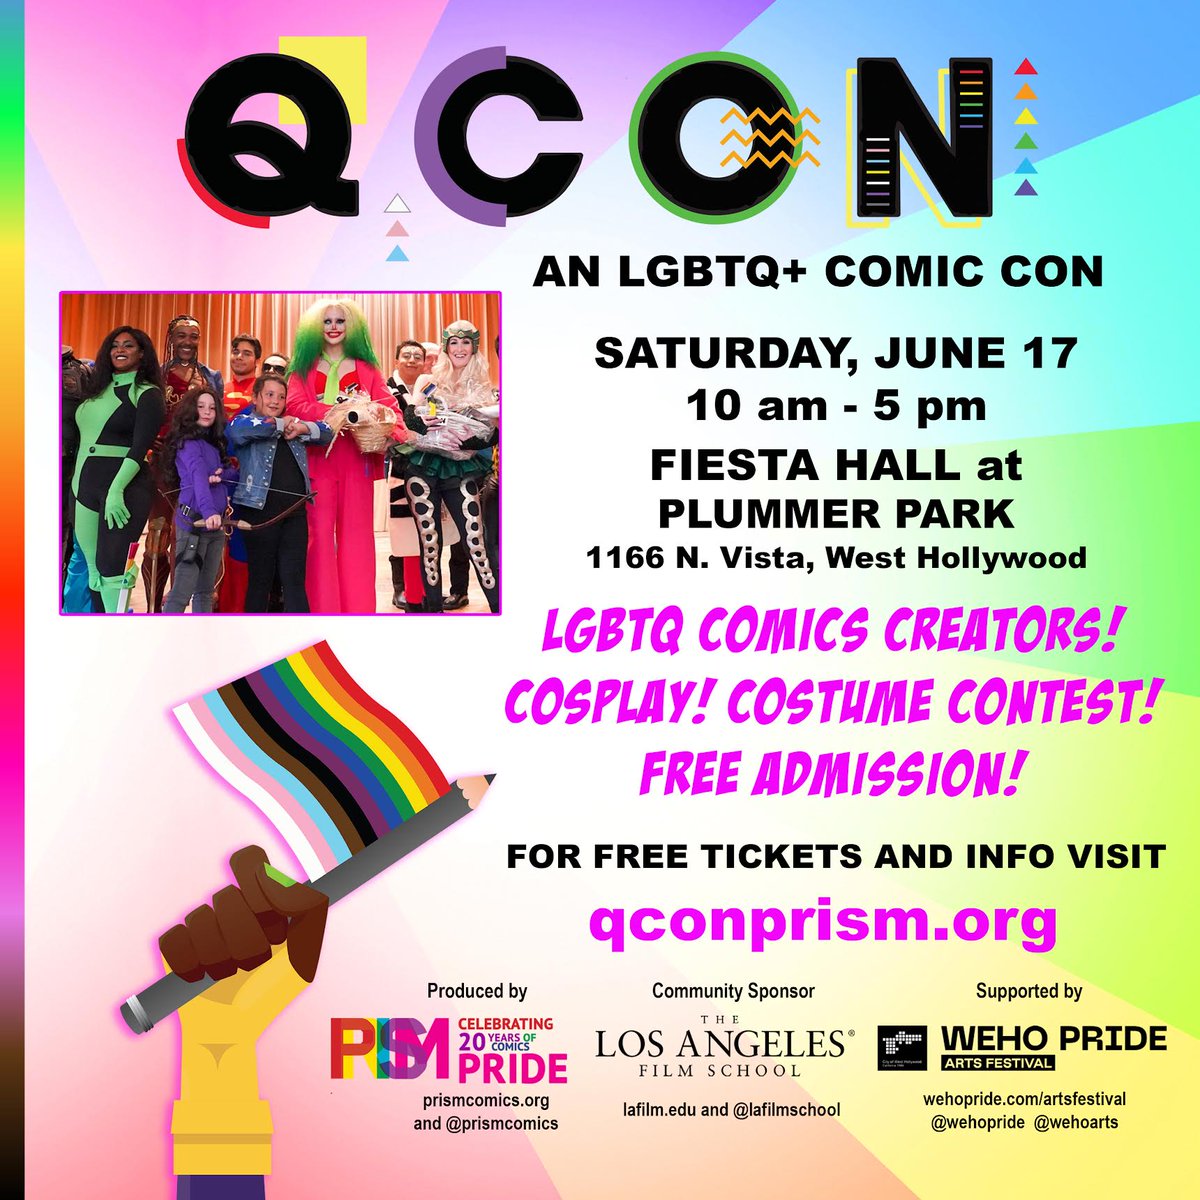 If you're in the Los Angeles area, come visit me at Q-Con this Saturday! Signing books 1-2pm at Fiesta Hall in Plummer Park, WeHo.